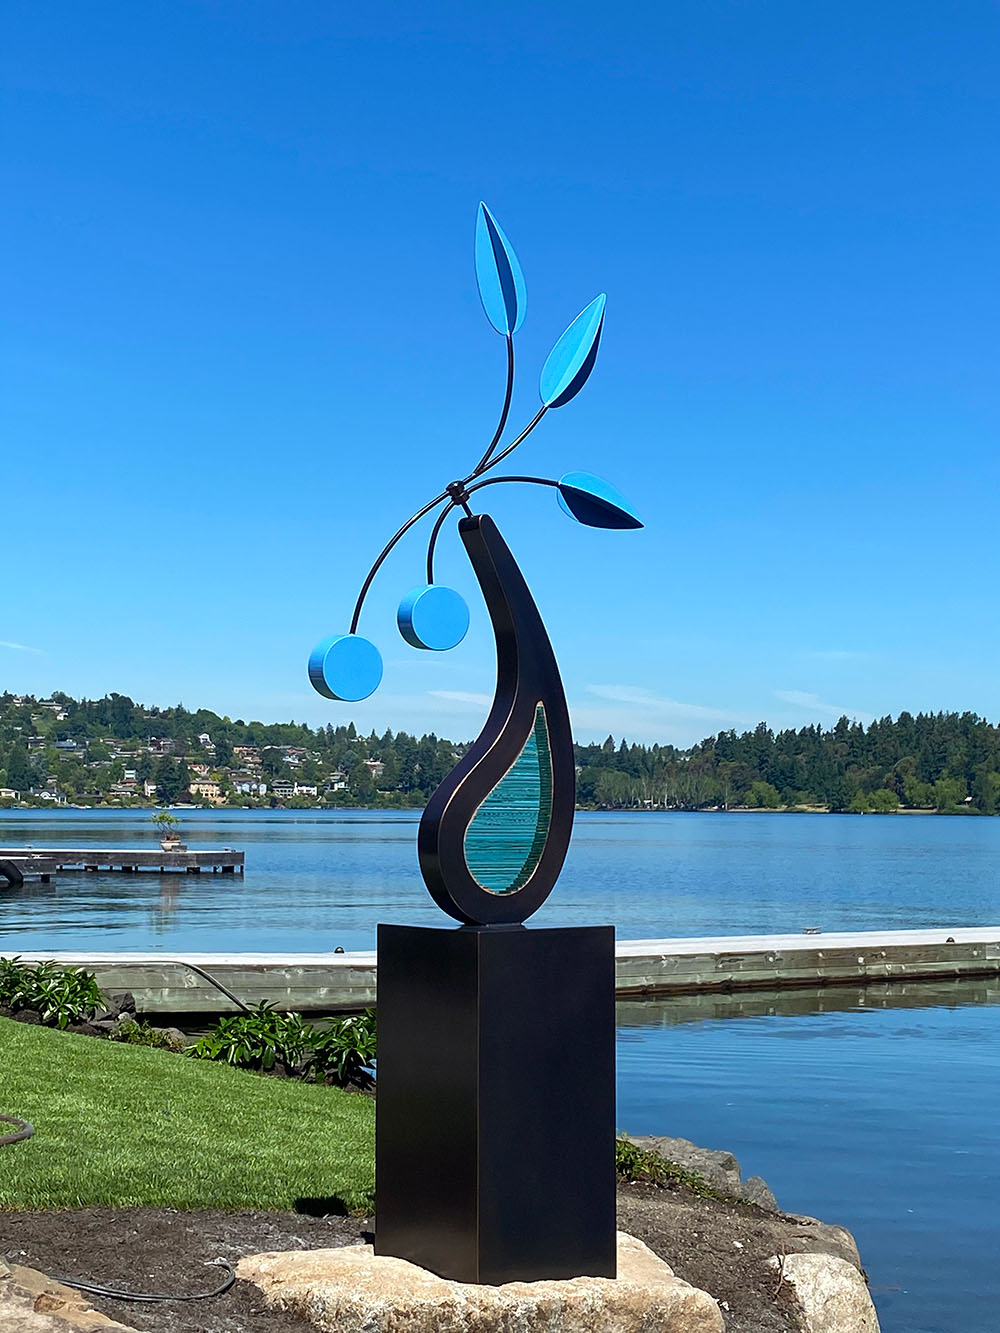 bronze kidney shaped sculpture with blue kinetic arms on a lake